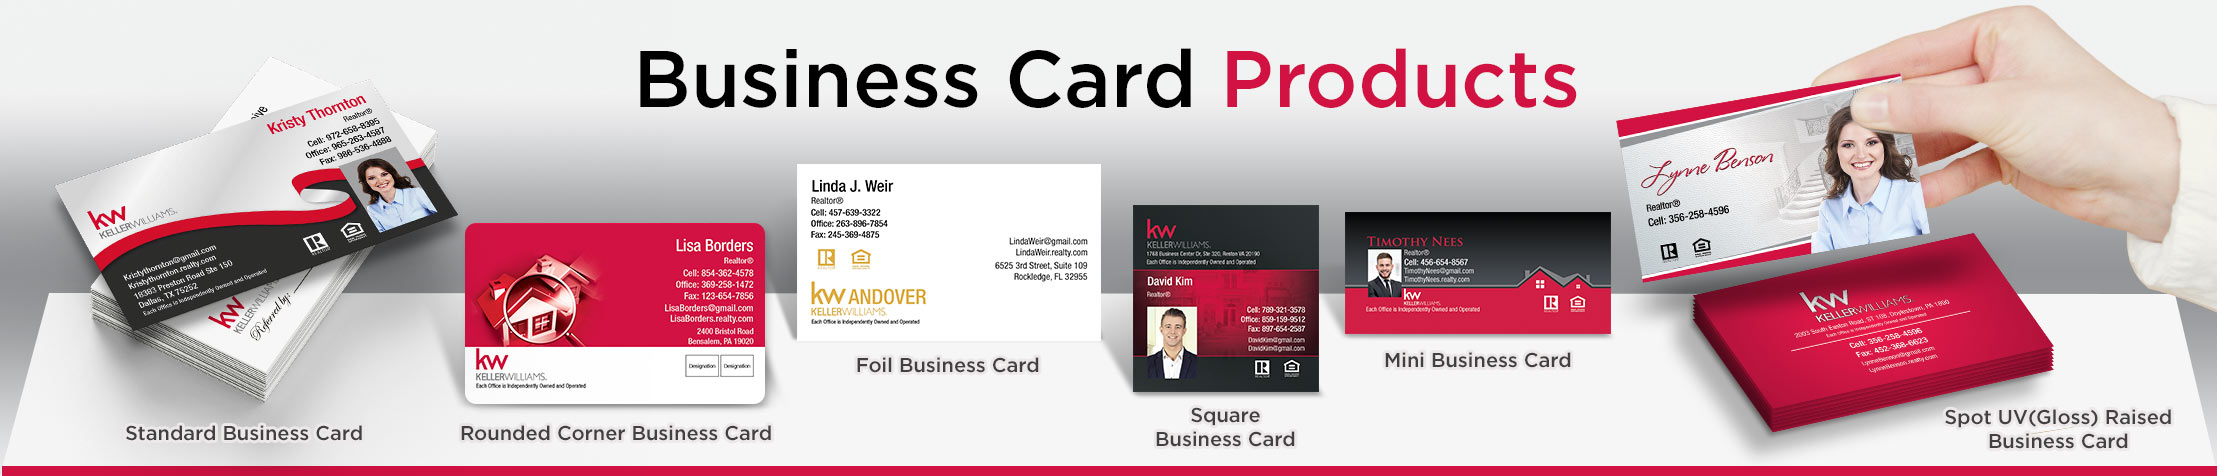 Keller Williams Real Estate Business Card Products - KW Approved Vendor - Unique, Custom Business Cards Printed on Quality Stock with Creative Designs for Realtors | BestPrintBuy.com